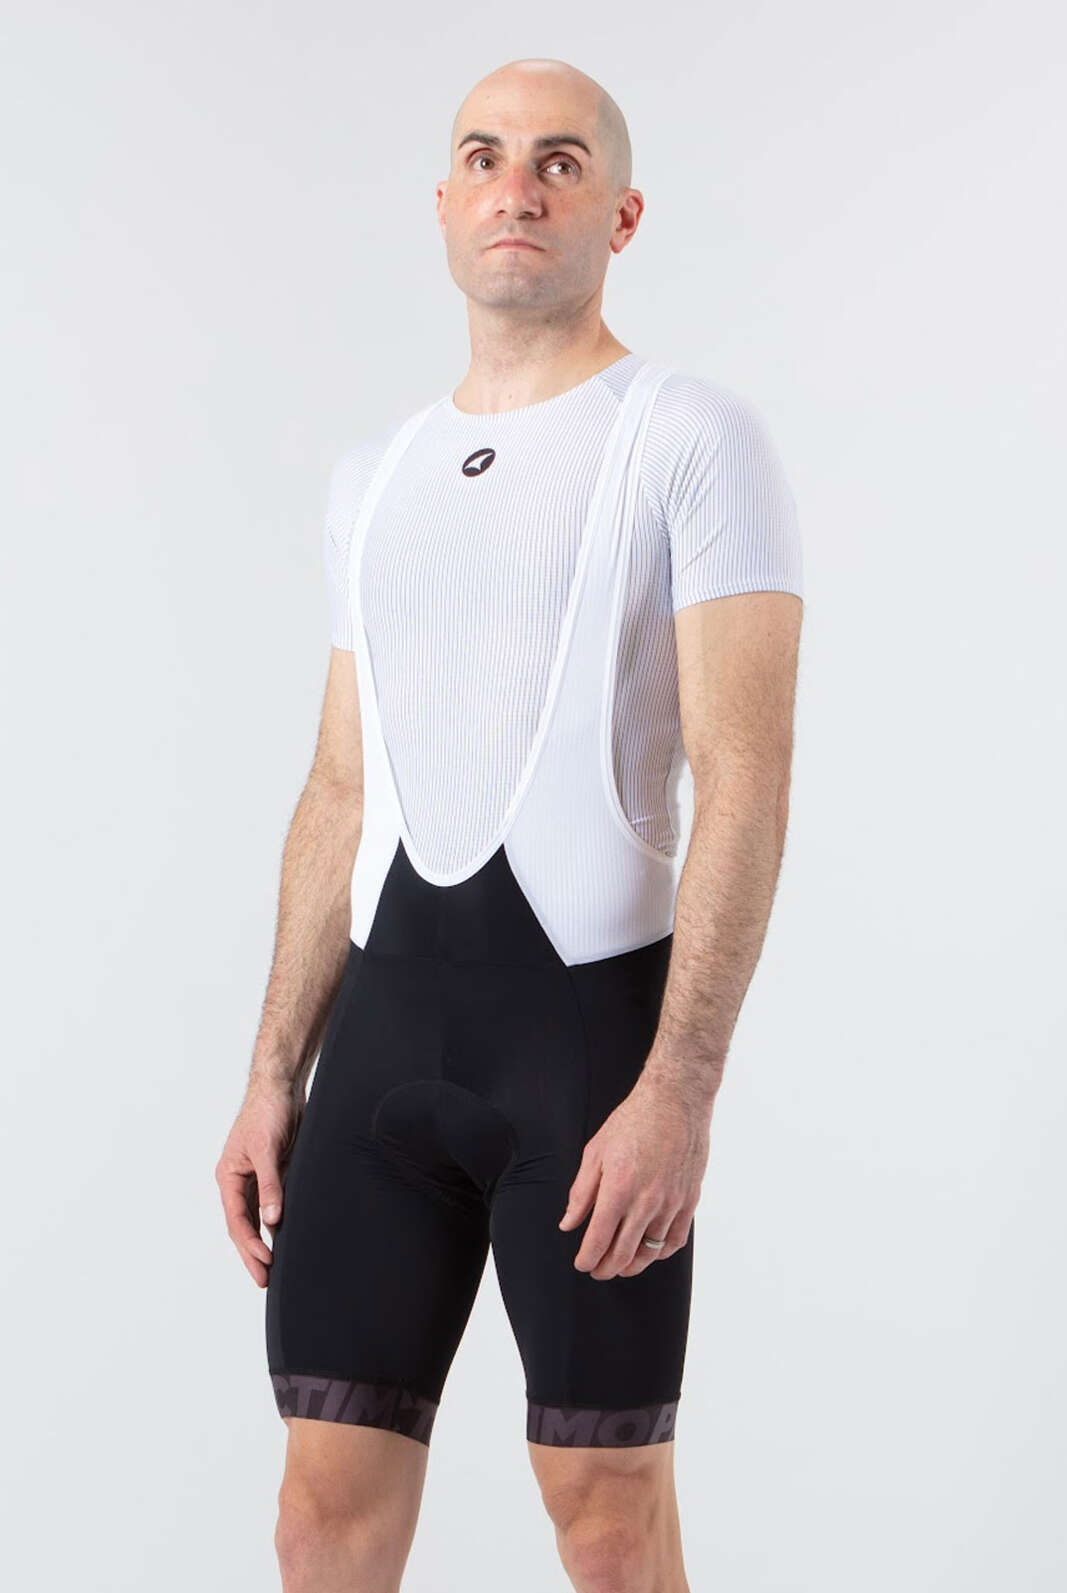 Men's Cycling Bibs - Continental Front View